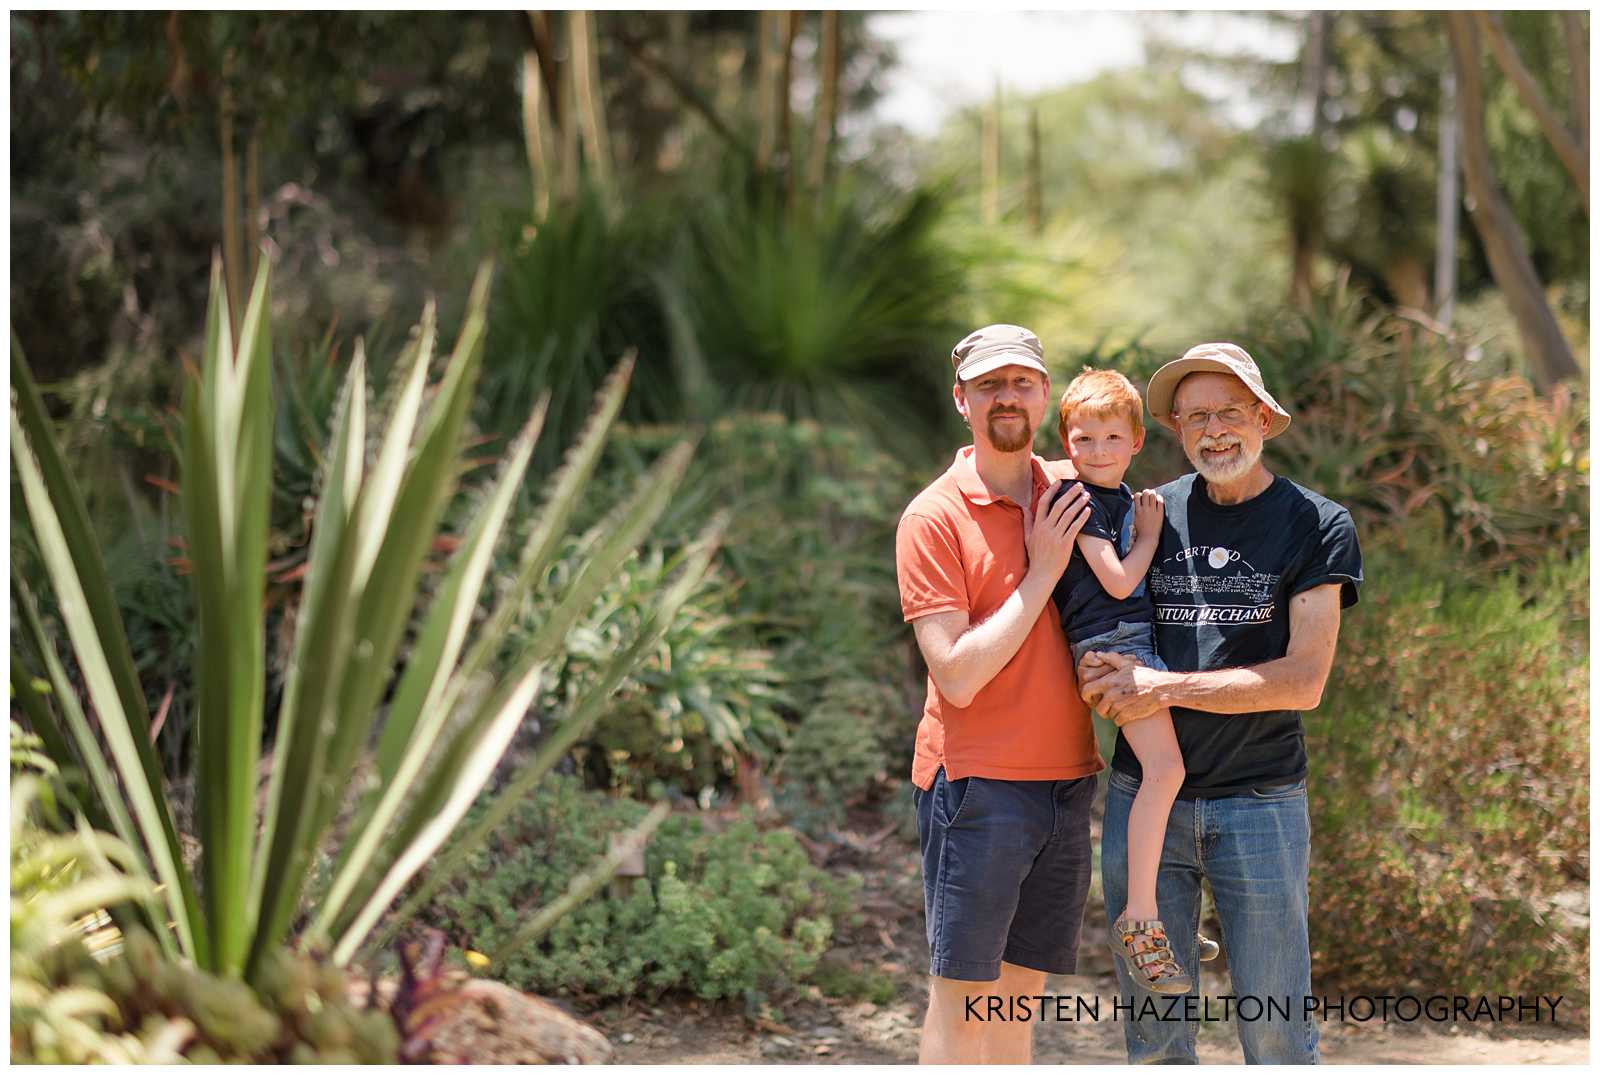 Family photos of a father, son, and grandfather at the Ruth Bancroft Garden in Walnut Creek, CA.